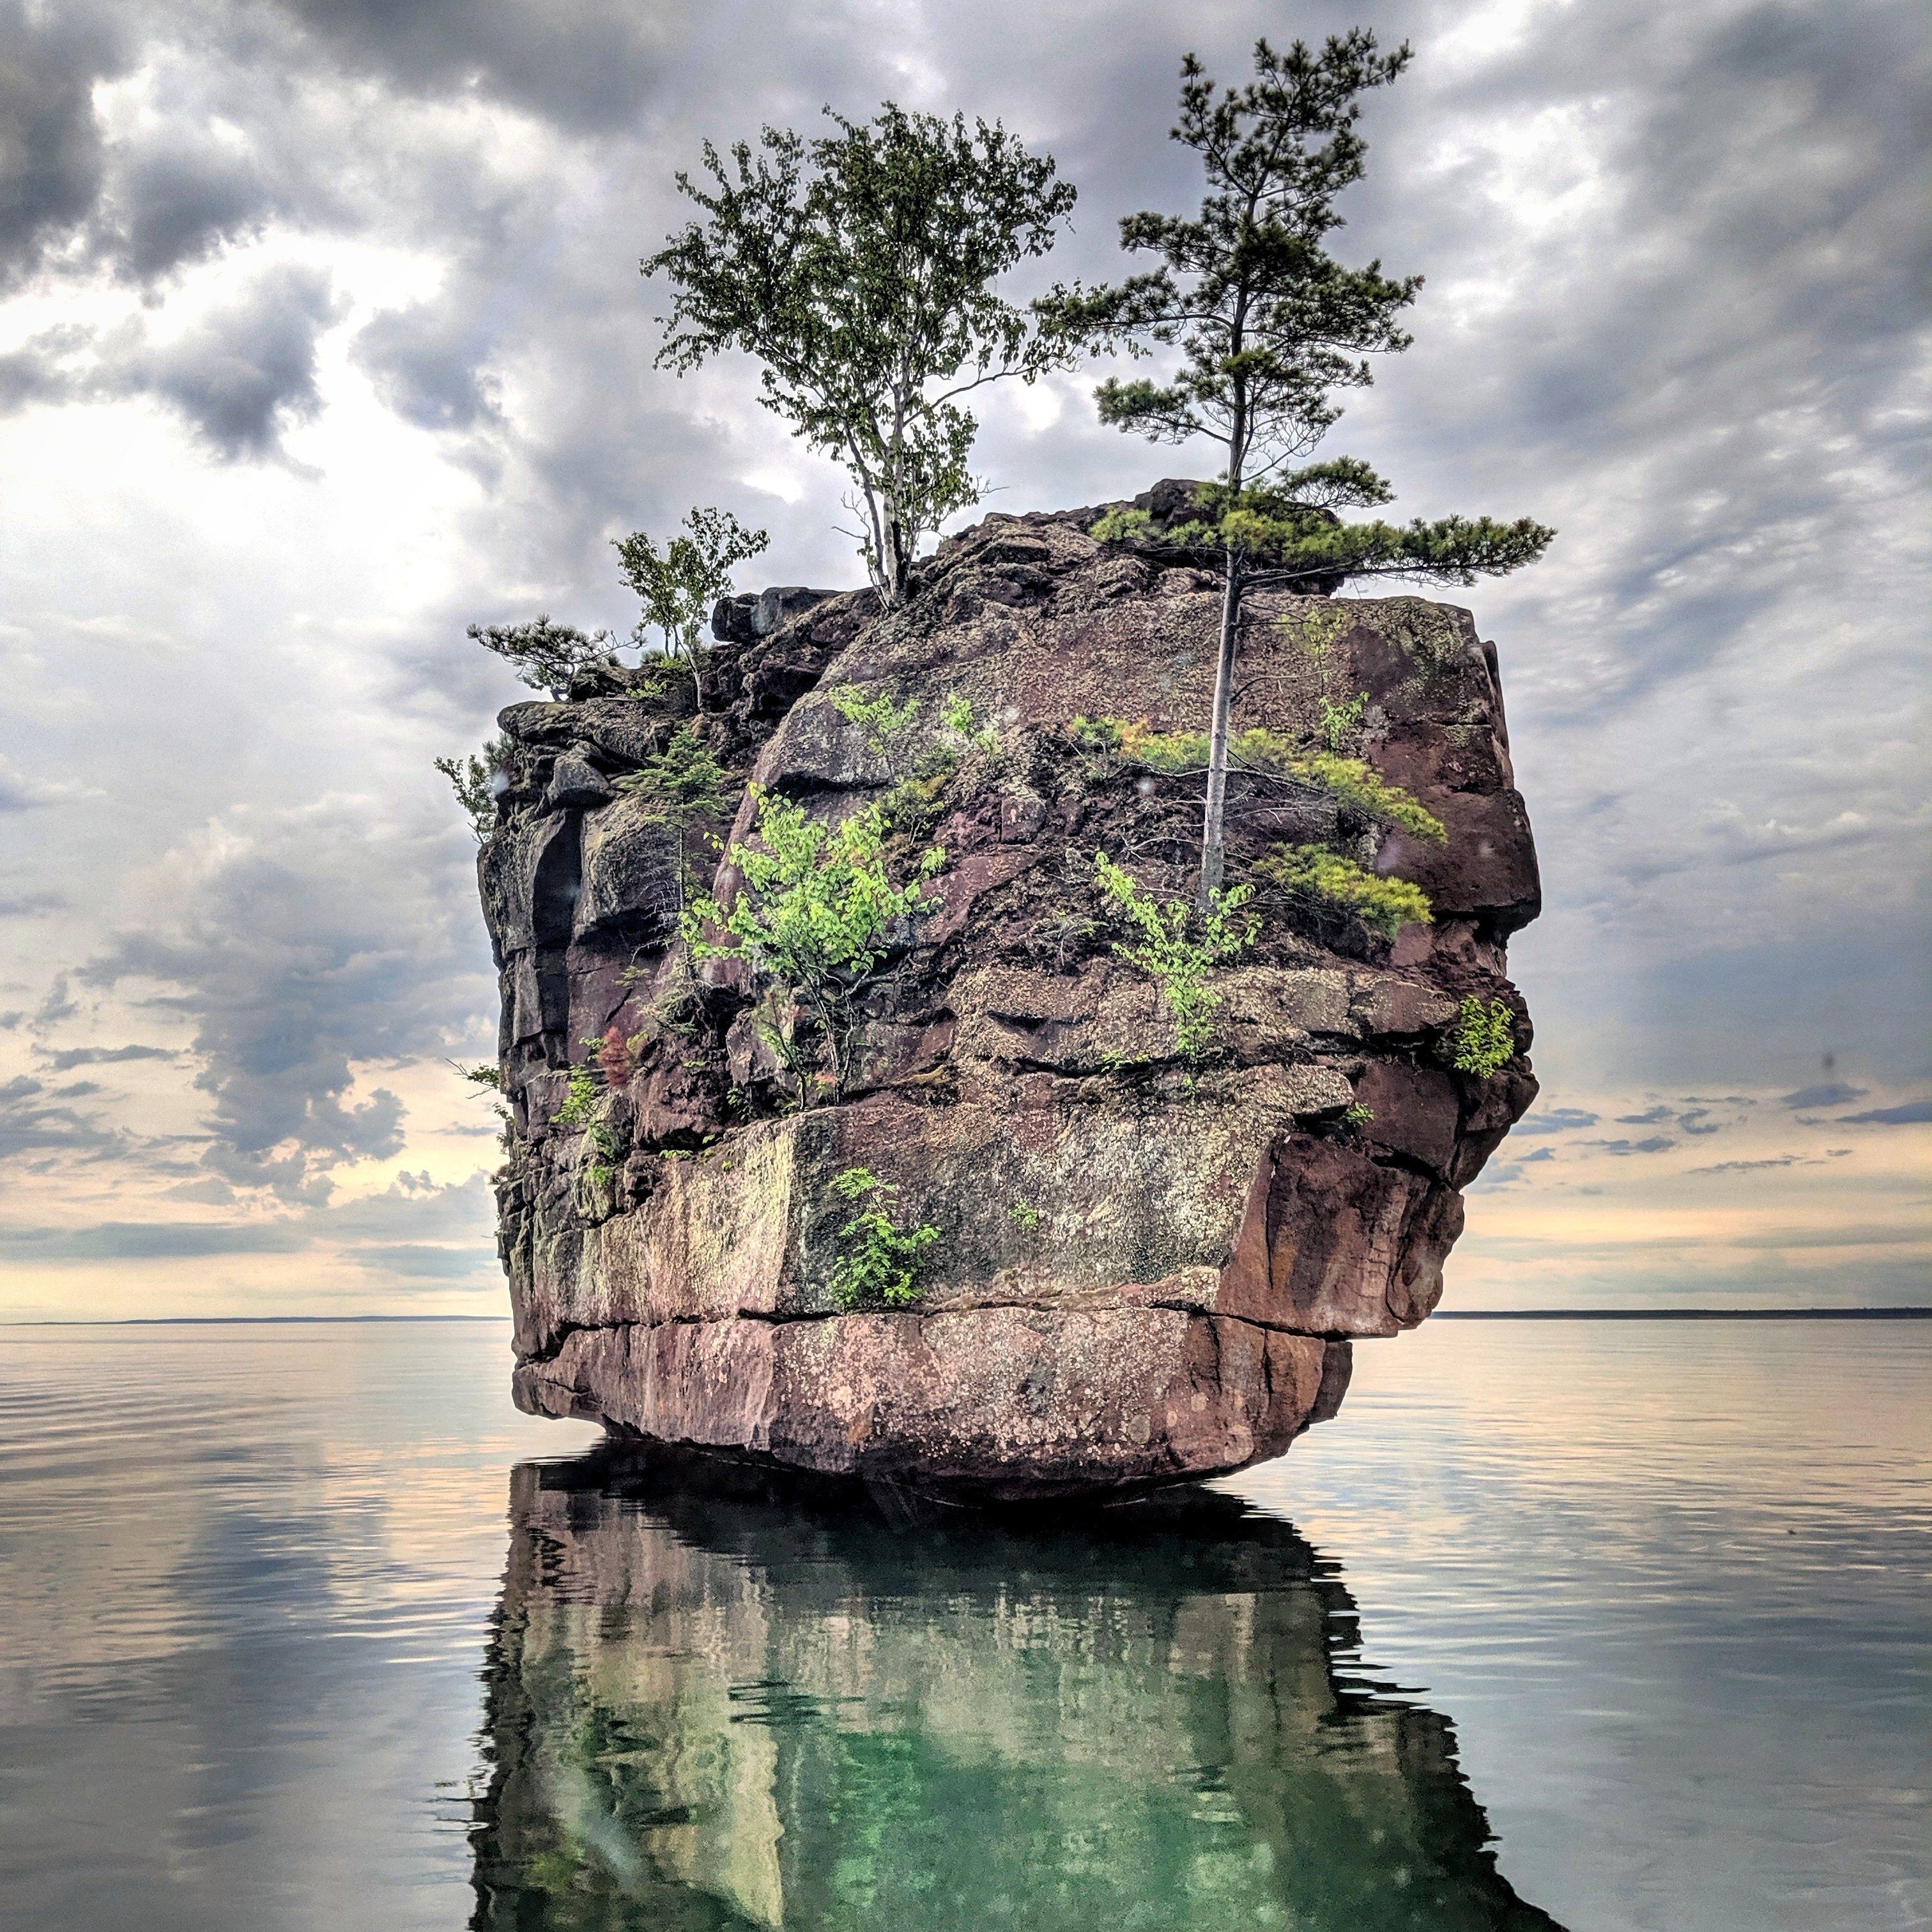 1st Place "Standing Rock Apostle Islands National Lakeshore" by Benjamin Perry